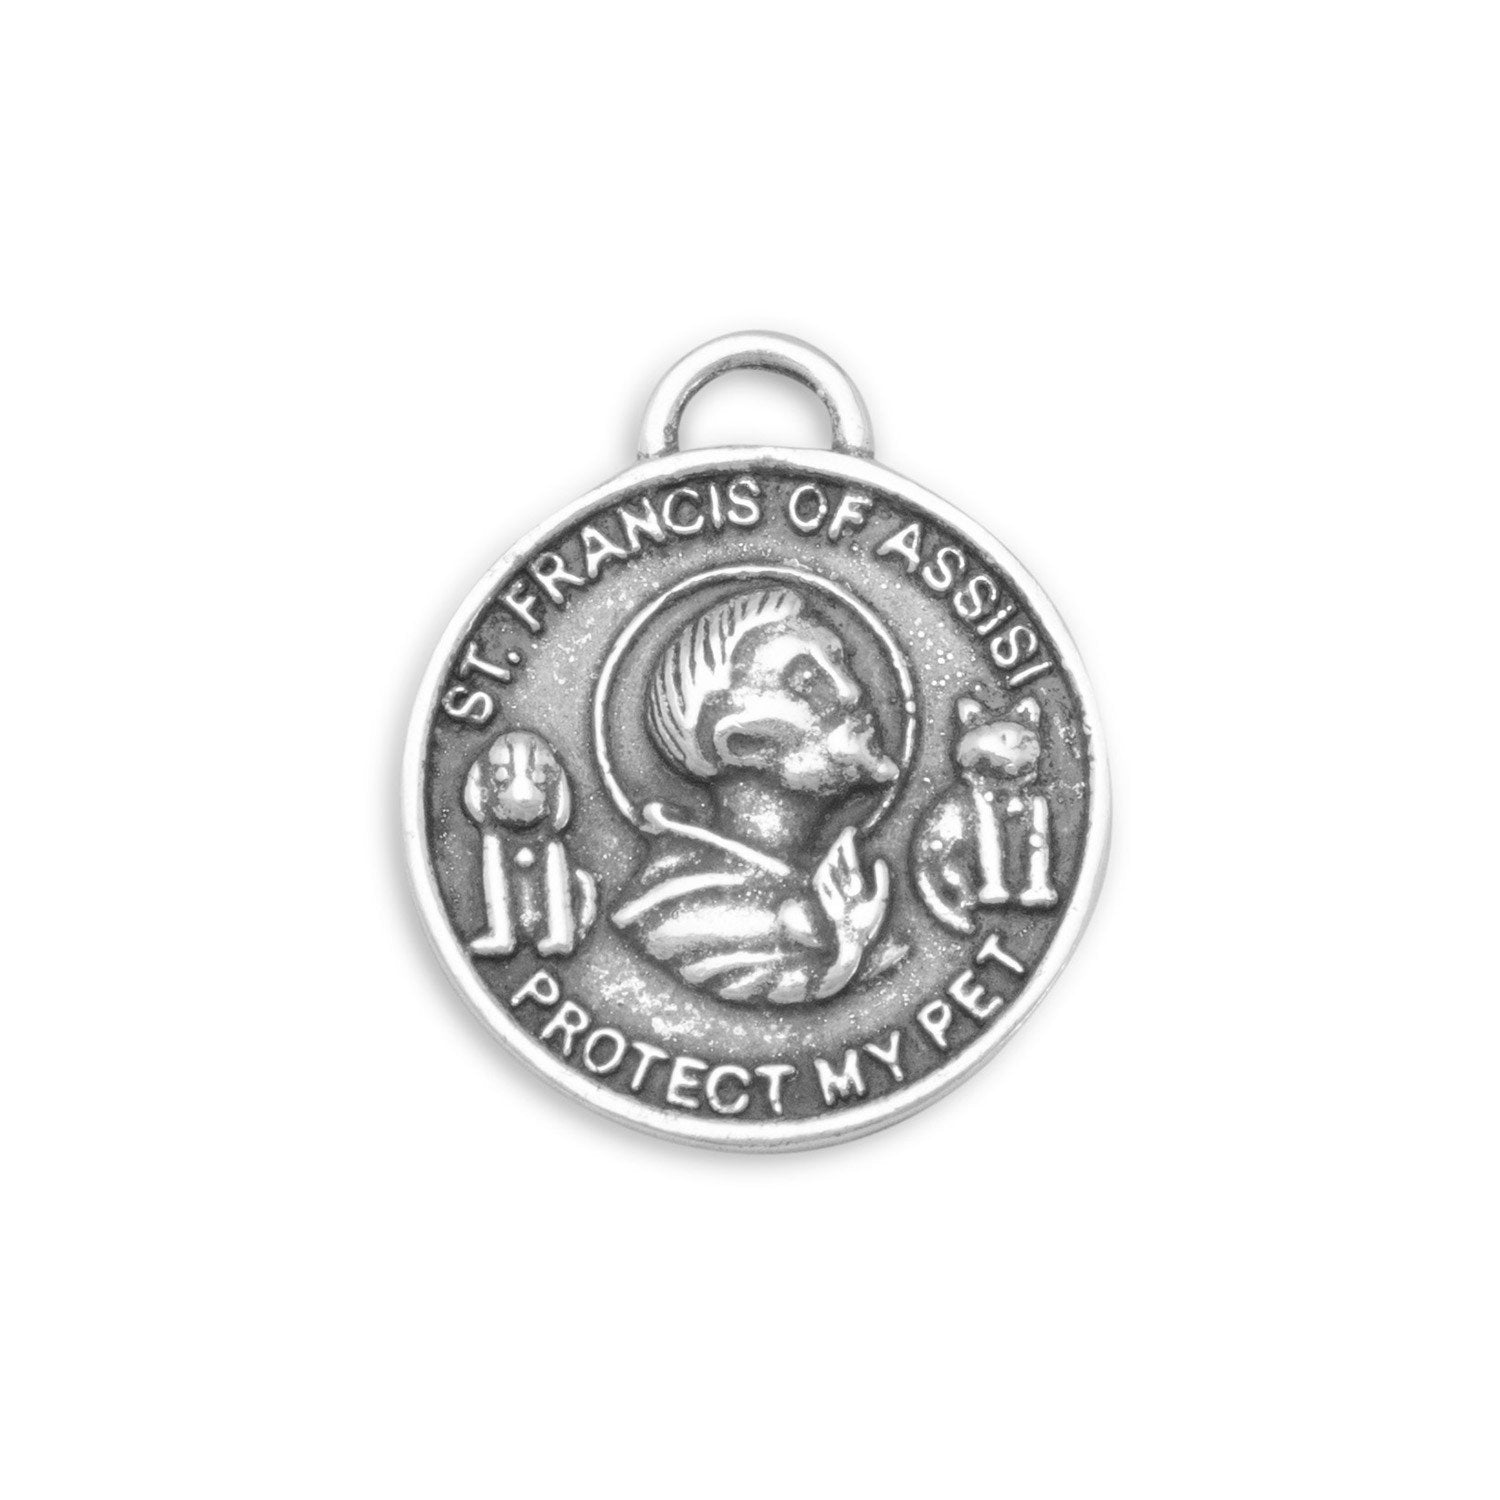 Oxidized St. Francis of Assisi Charm